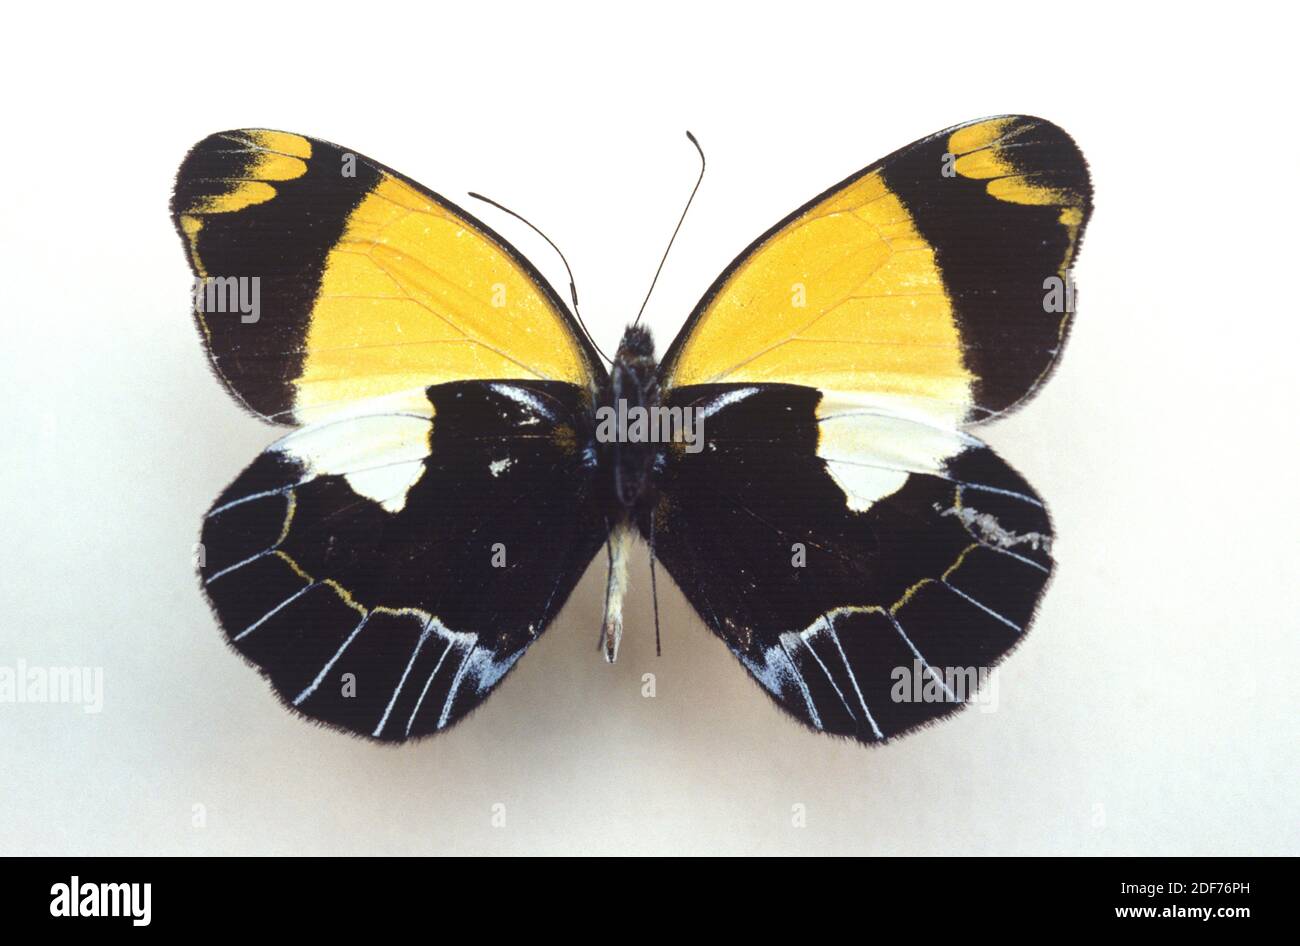 Delias niepelti is a butterfly native to New Guinea. Ventral surface. Stock Photo